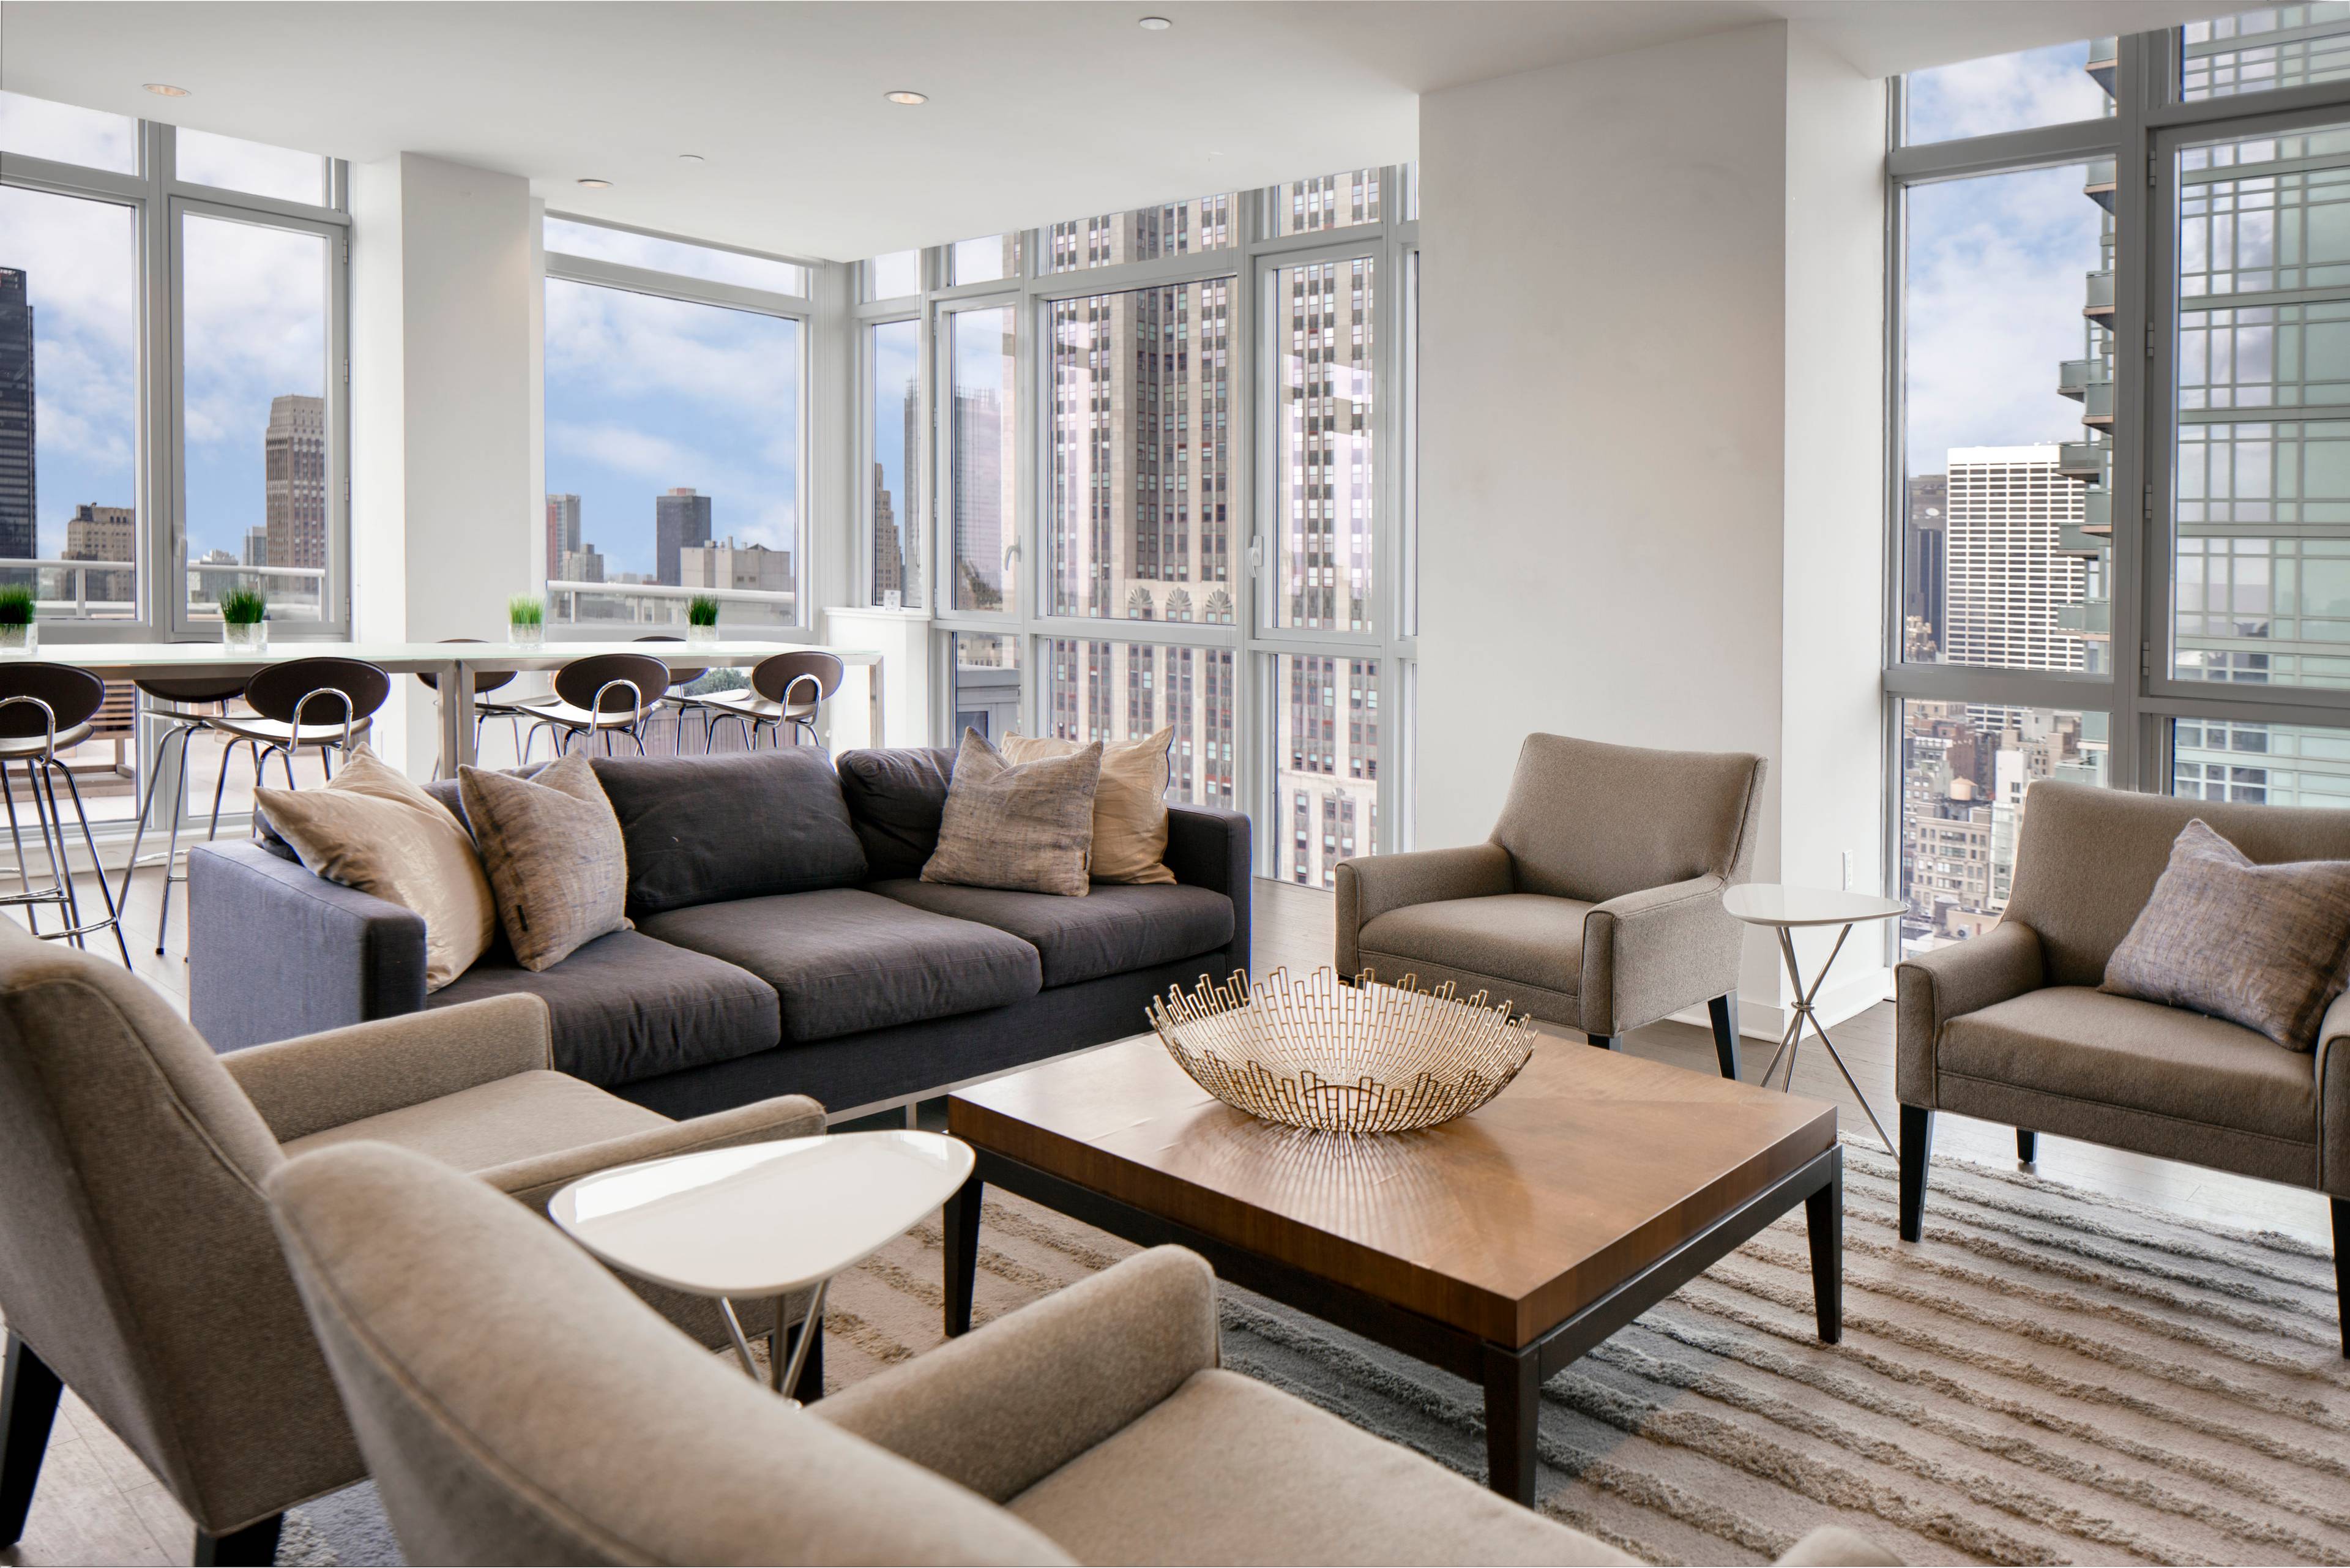 Mint Midtown East 2 Bedroom Apartment with 2 Baths featuring a Fitness Center and Rooftop Deck